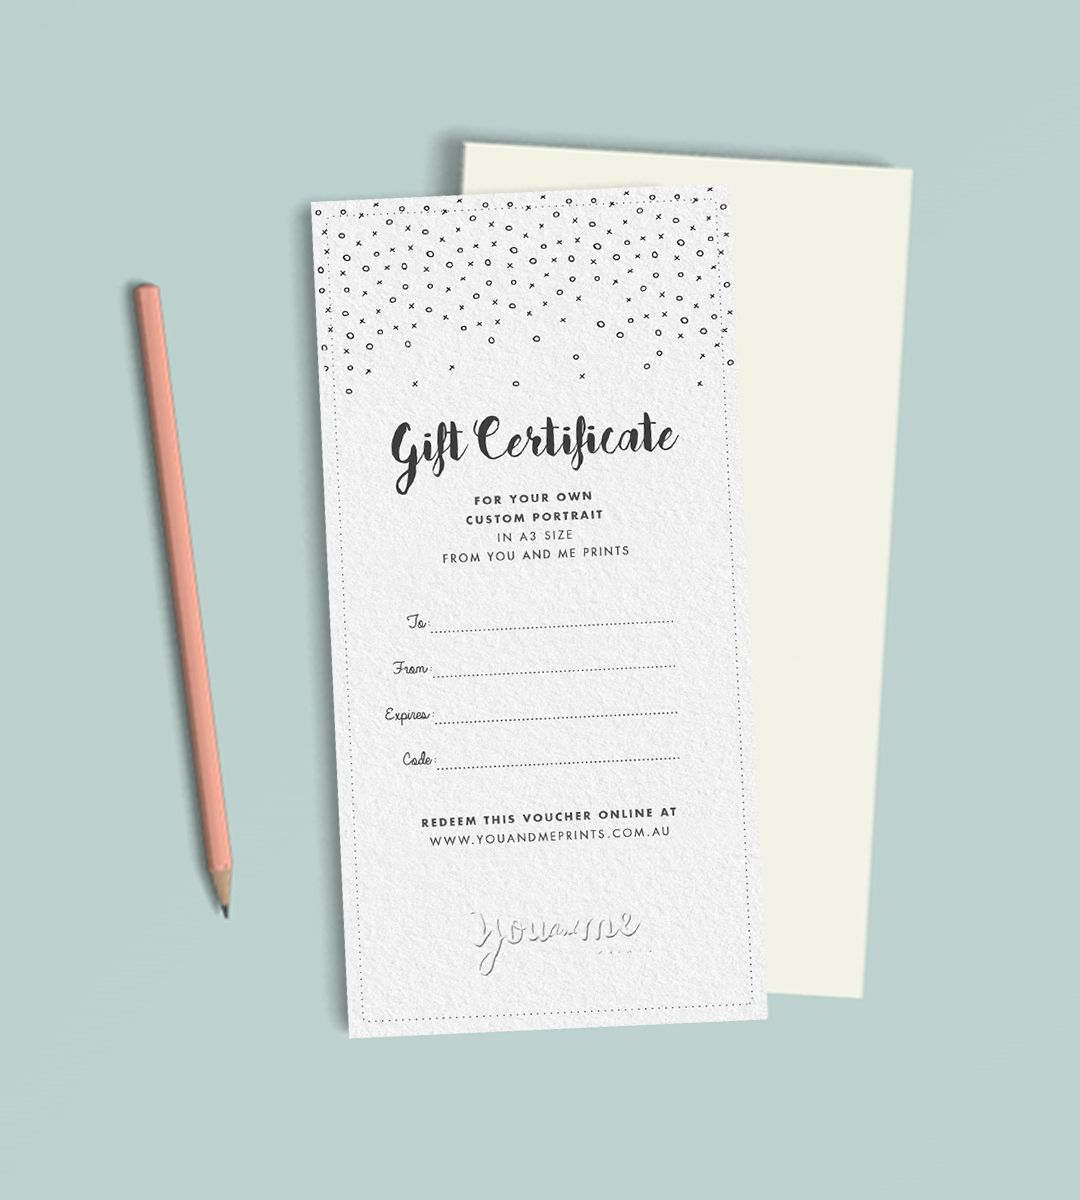 Gift Voucher | Gift Voucher Design, Gift Vouchers, Gift Throughout Custom Gift Certificate Template